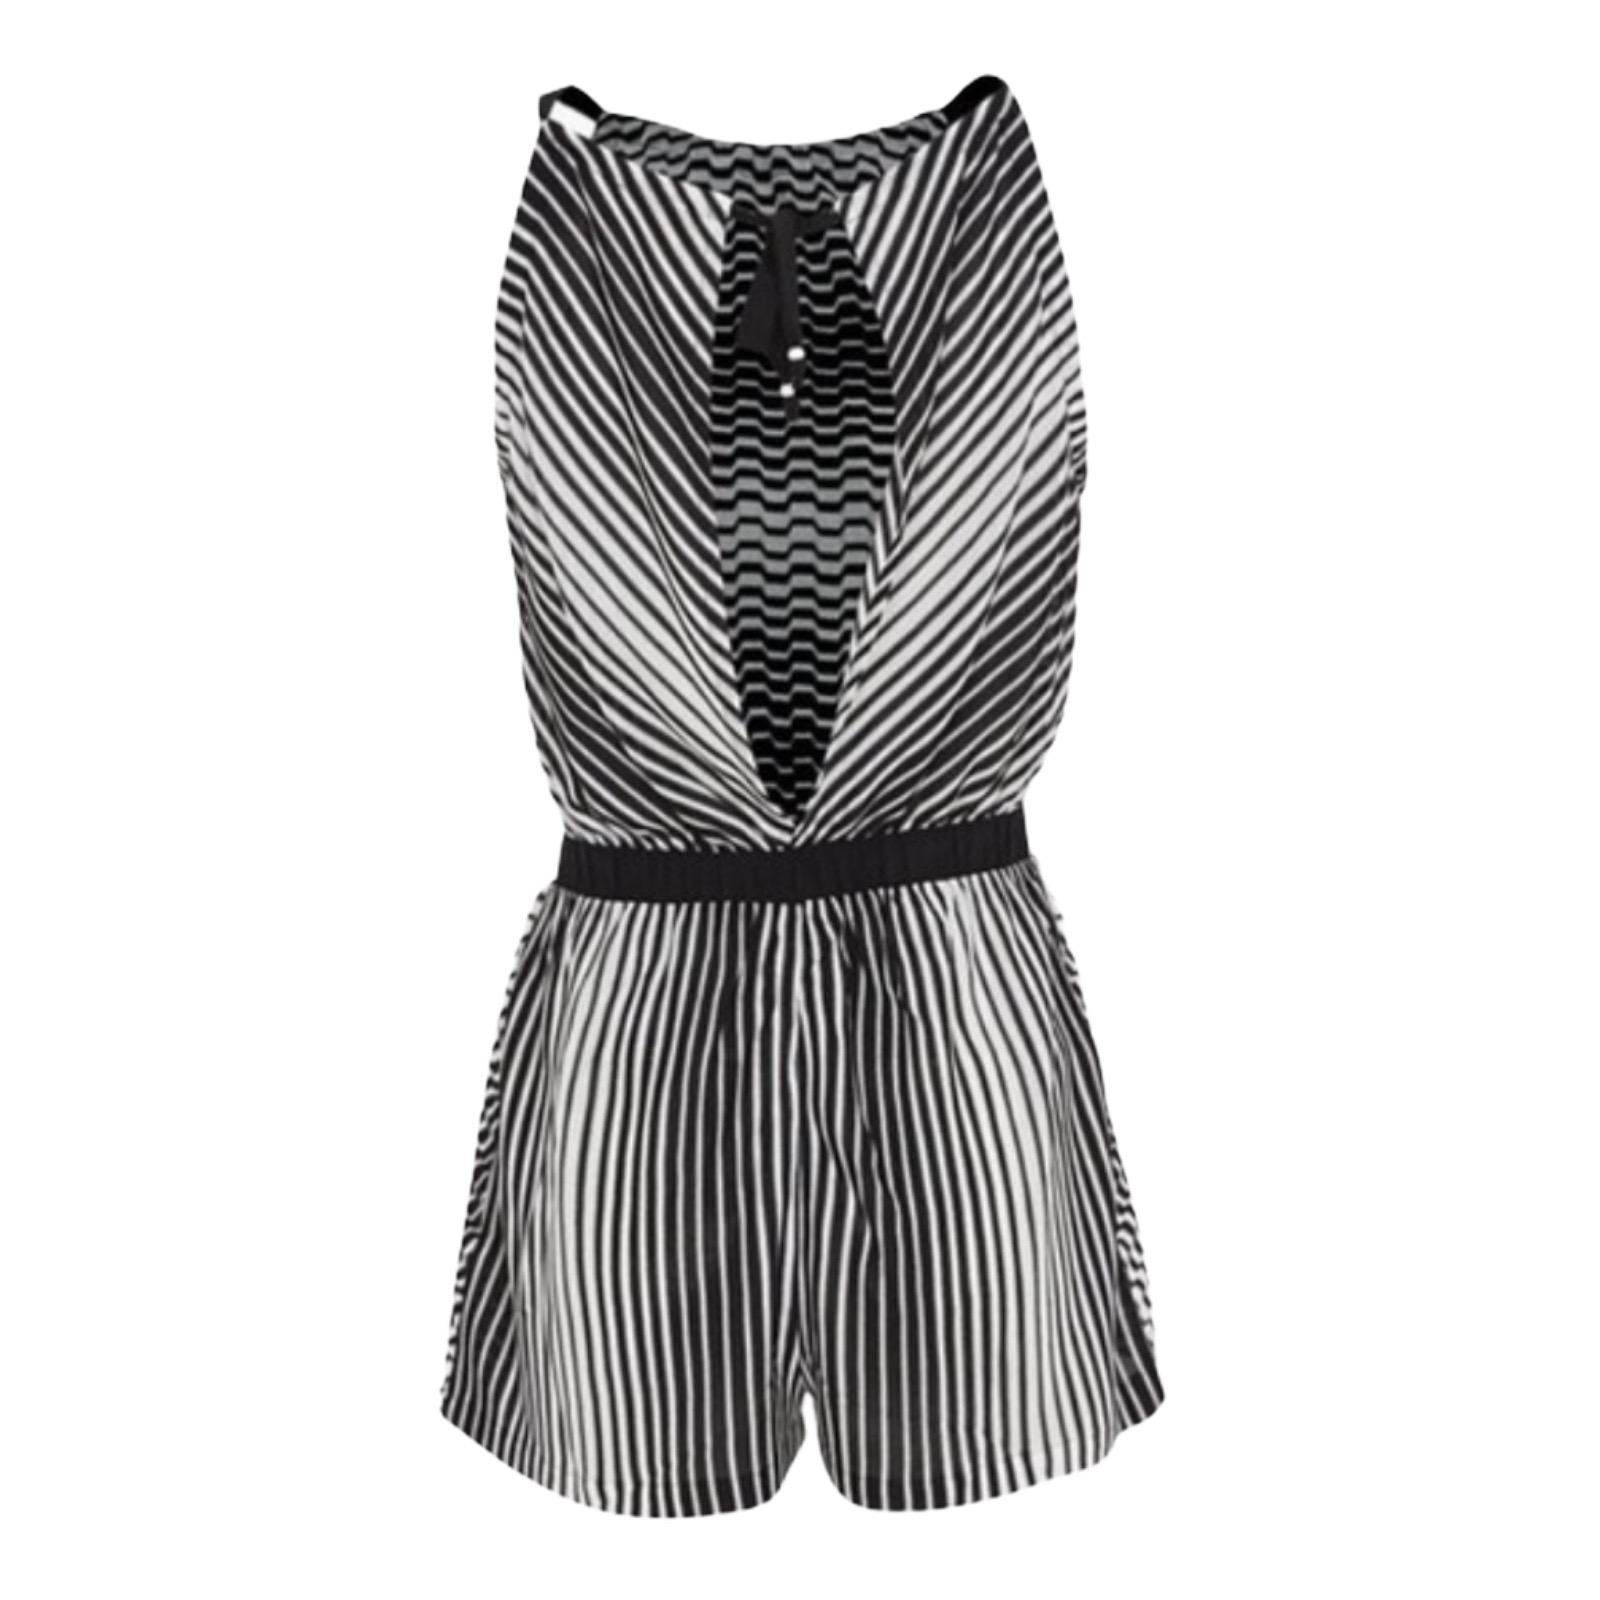 Get in on this spring's jumpsuit trend with this monochrome toned style by Missoni. Slip it on over a bikini by day or team with glossy heels for a hot evening look.

Classic MISSONI signature zigzag crochet knit
Multicolored woven chevron short